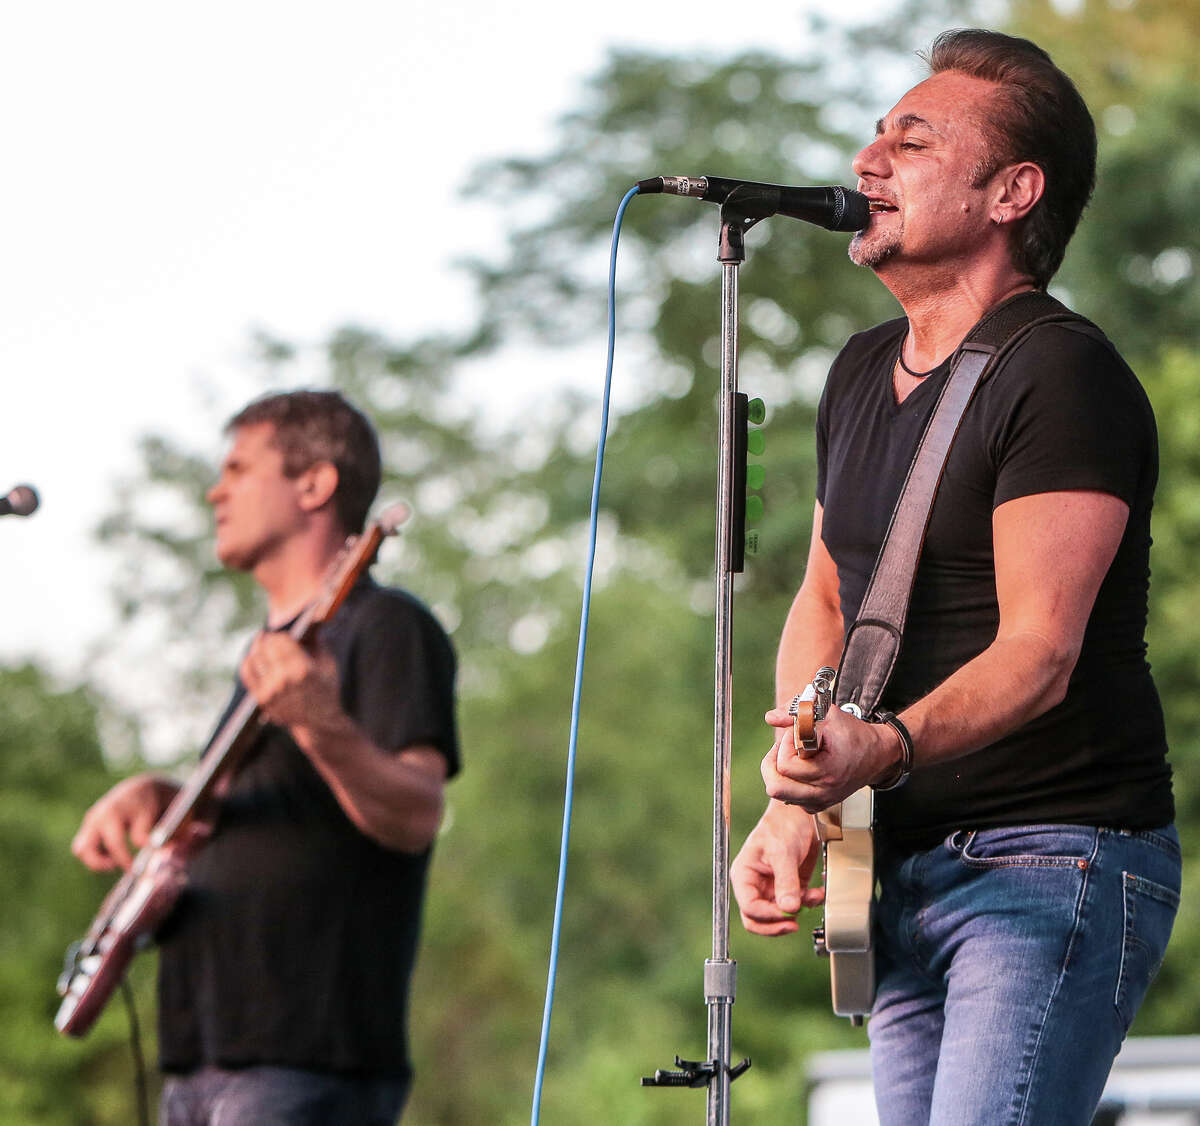 Tramps Like Us, a Bruce Springsteen cover band, will play at the Hamden Town Center Park during a benefit concert for Circle of Care on Friday. Find out more.